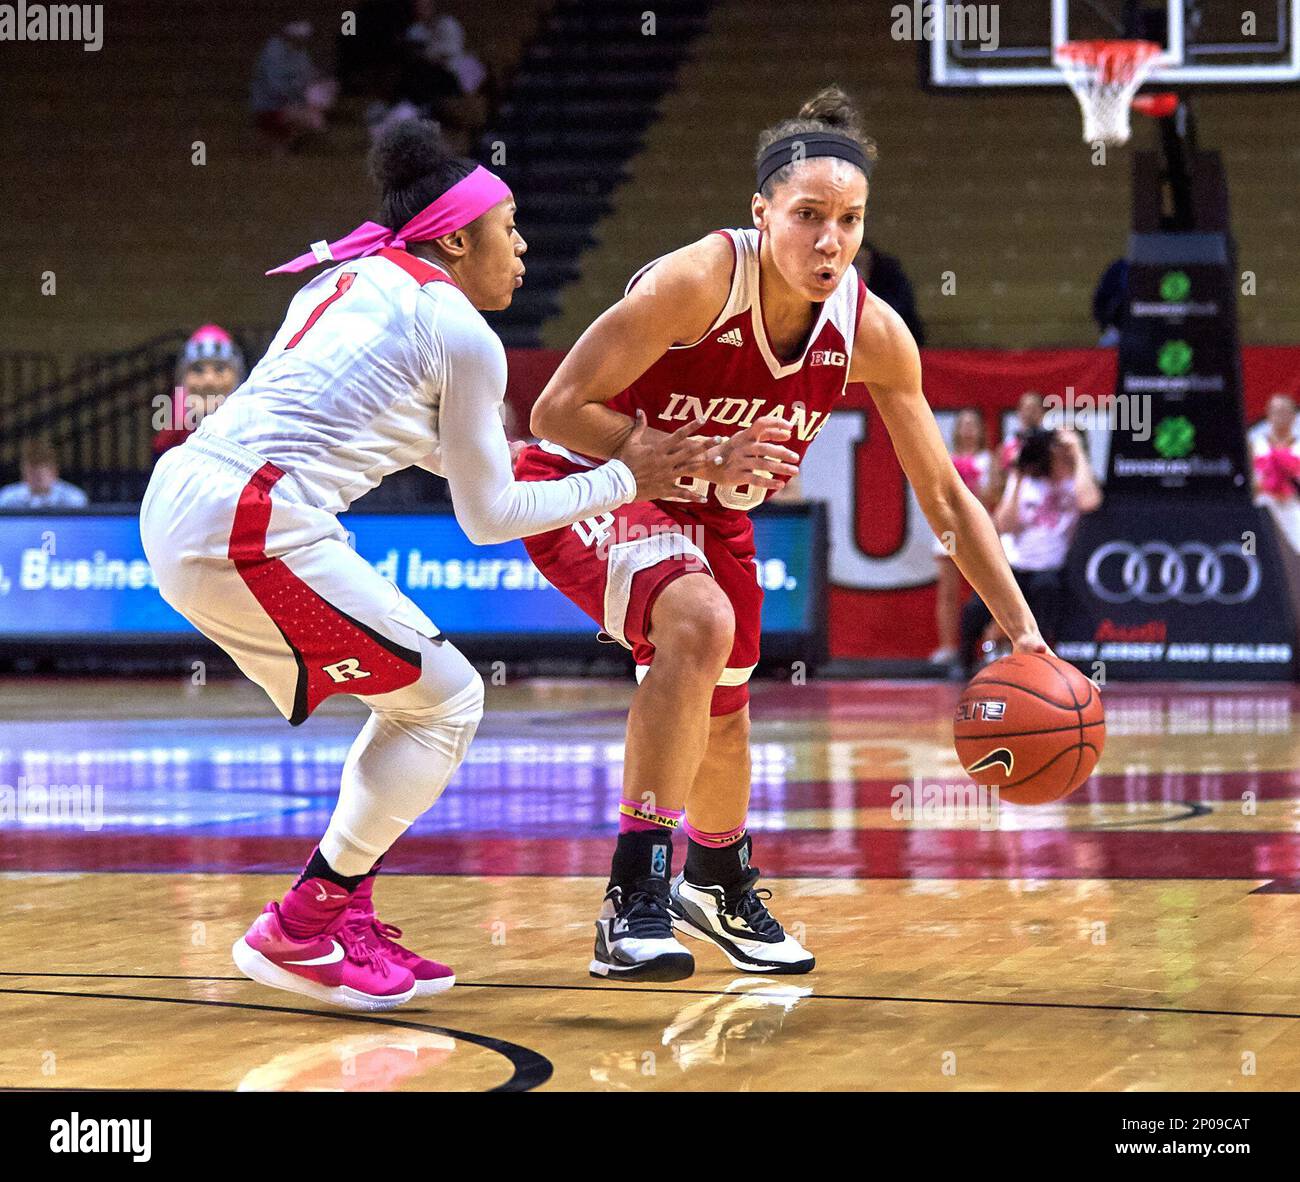 Indiana's guard Alexis Gassion (23) at the Louis Brown Athletic